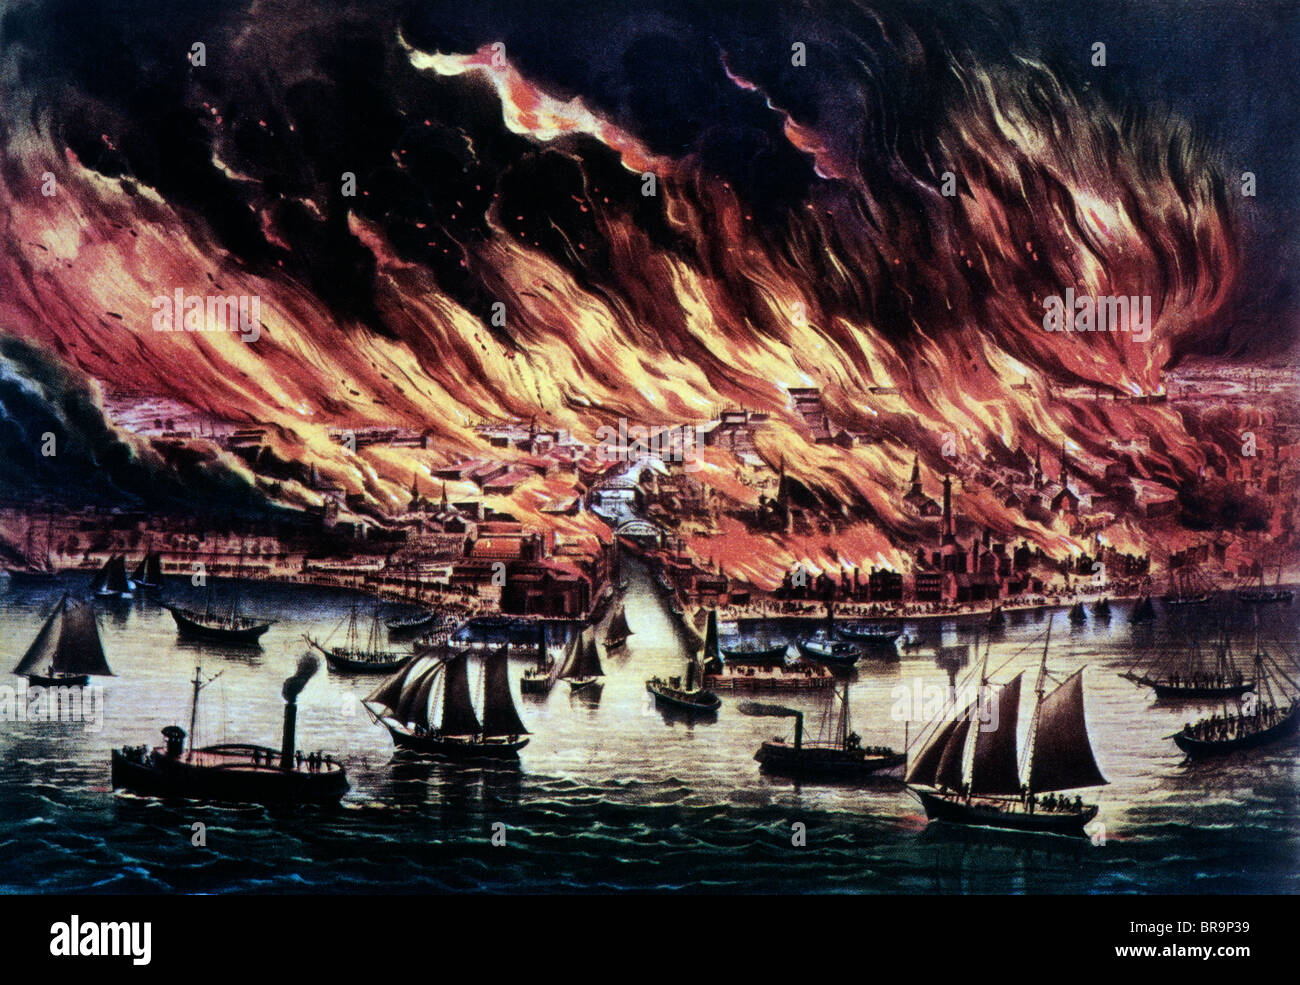 1800s LITHOGRAPH GREAT CHICAGO FIRE OCTOBER 8th 1871 WATERFRONT AT CHICAGO RIVER AND LAKE MICHIGAN Stock Photo